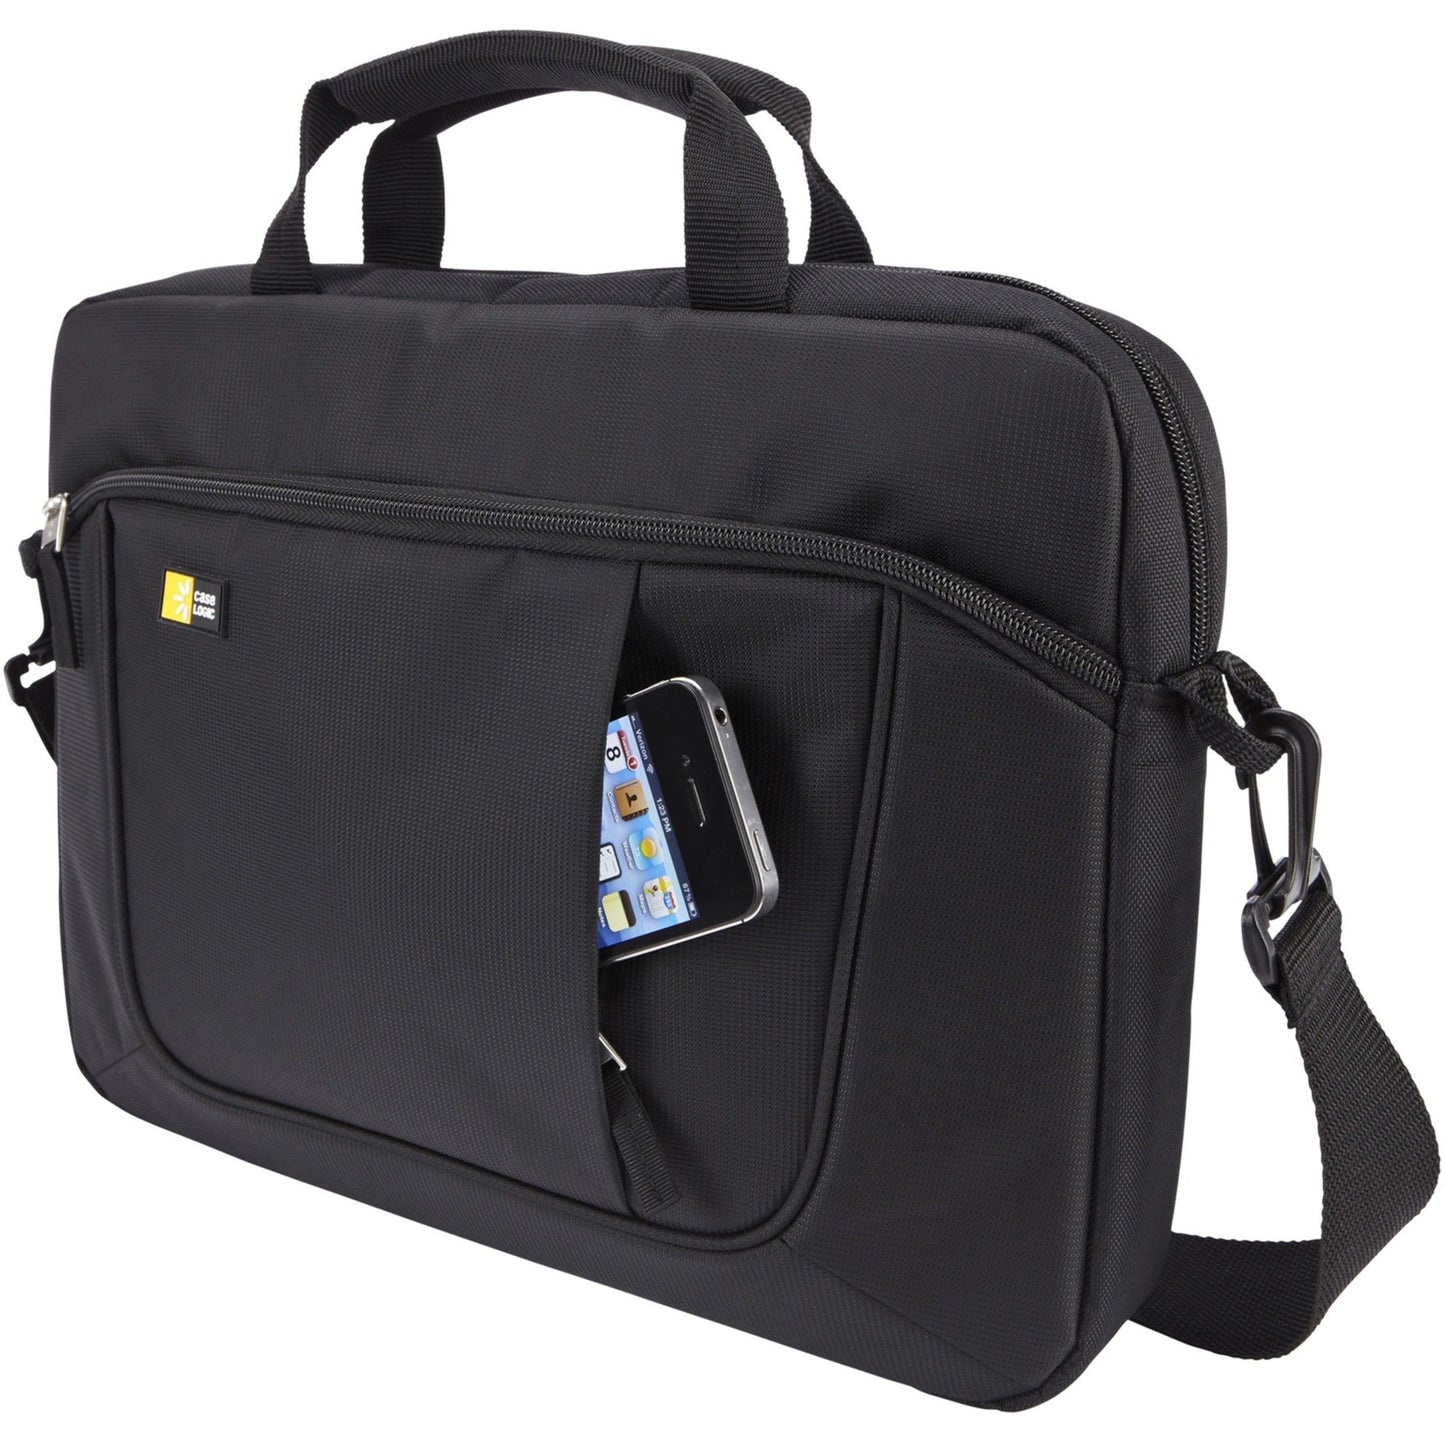 Case Logic AUA-314 Carrying Case for 14.1" Apple iPad Notebook - Black